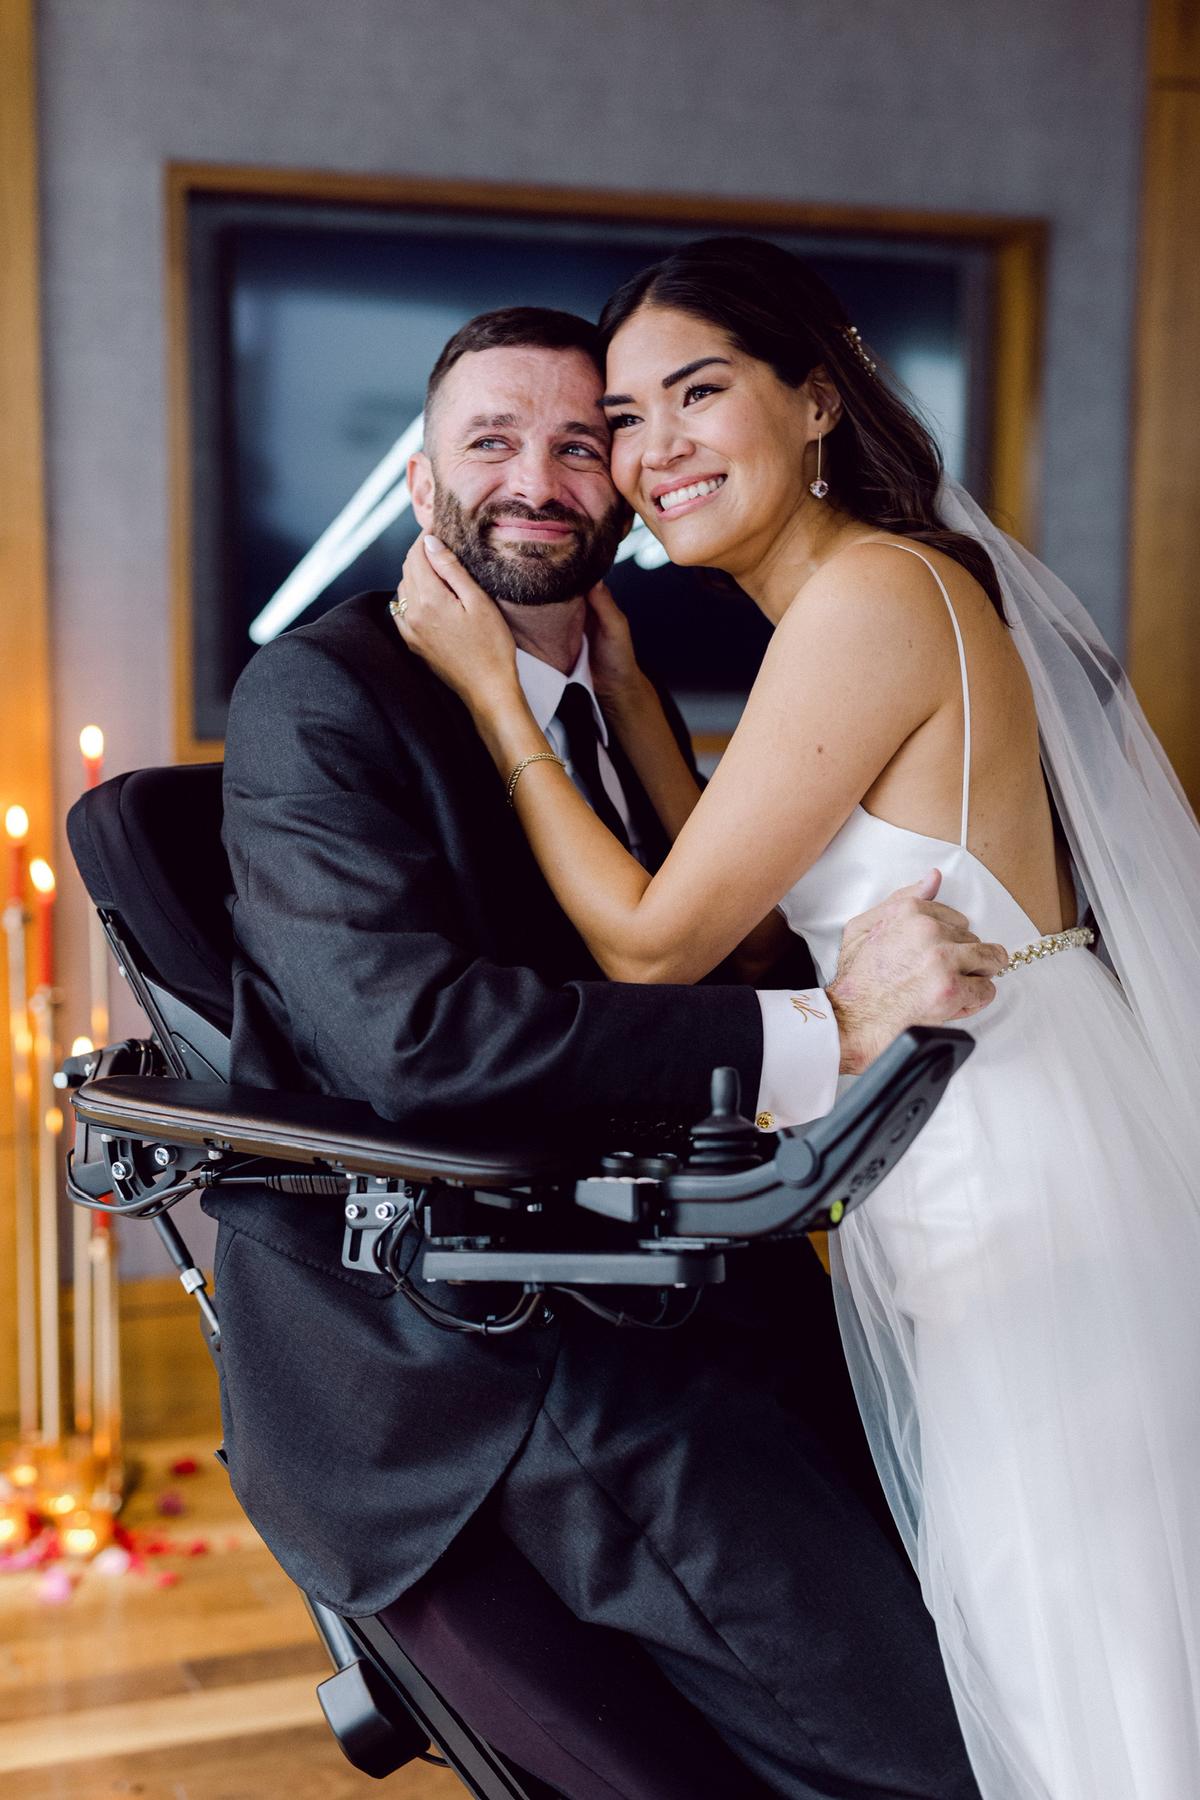 Hanna and Jerod got married in Kentucky on Dec. 18, 2021—the 10th anniversary of Jerod’s accident. (Courtesy of <a href="https://positivelyparalyzed.org/">Hanna and Jerod Nieder</a>)